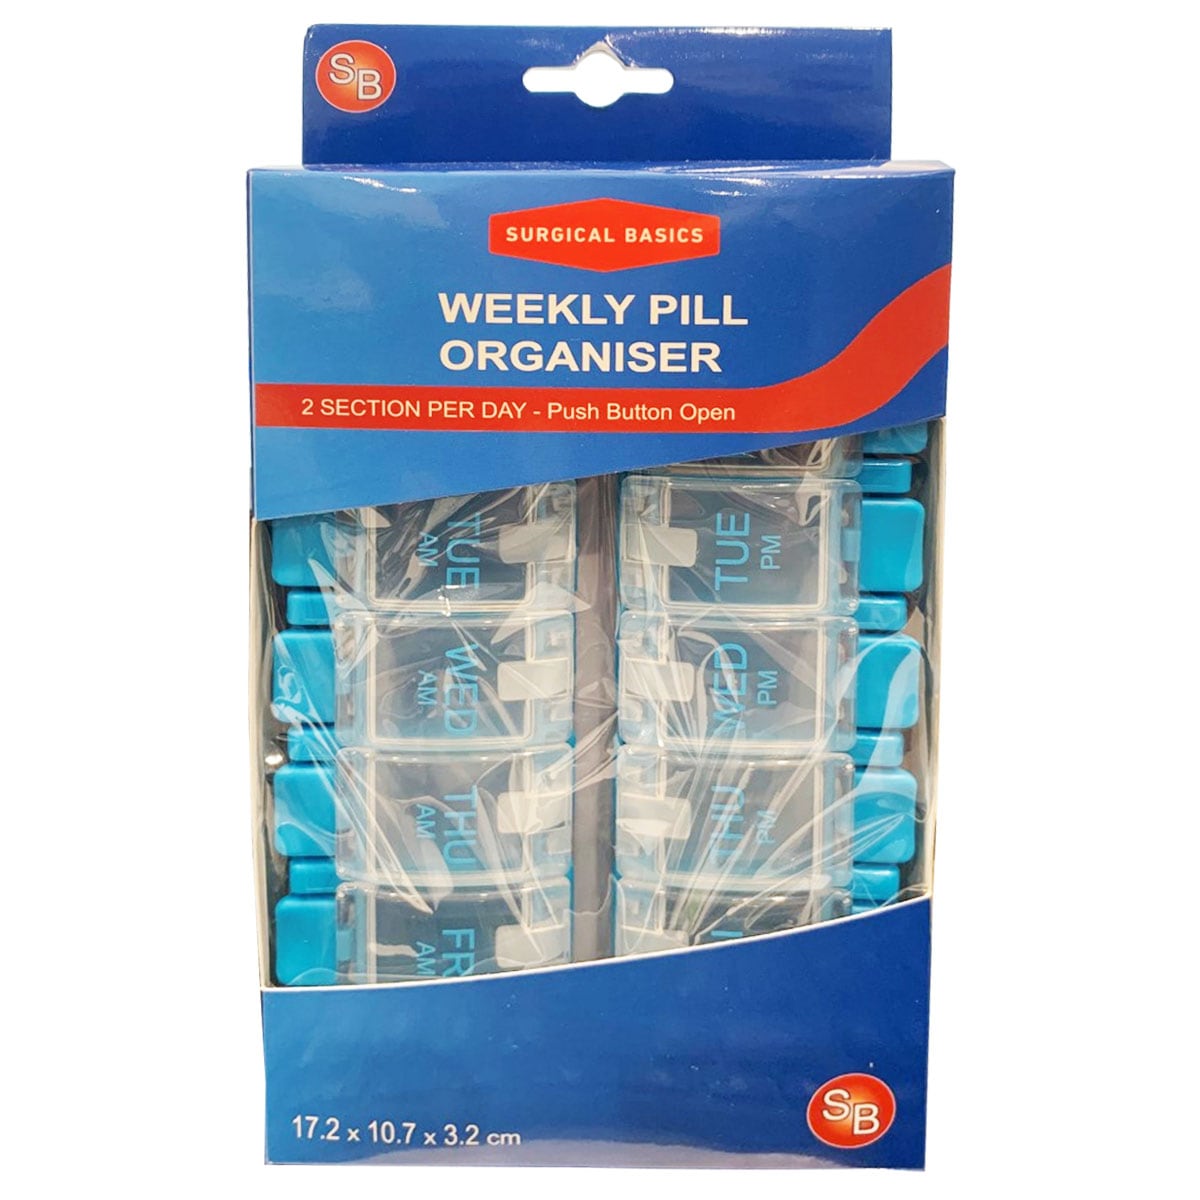 Surgical Basics AM/PM Weekly Pill Organiser (Colours selected at random)